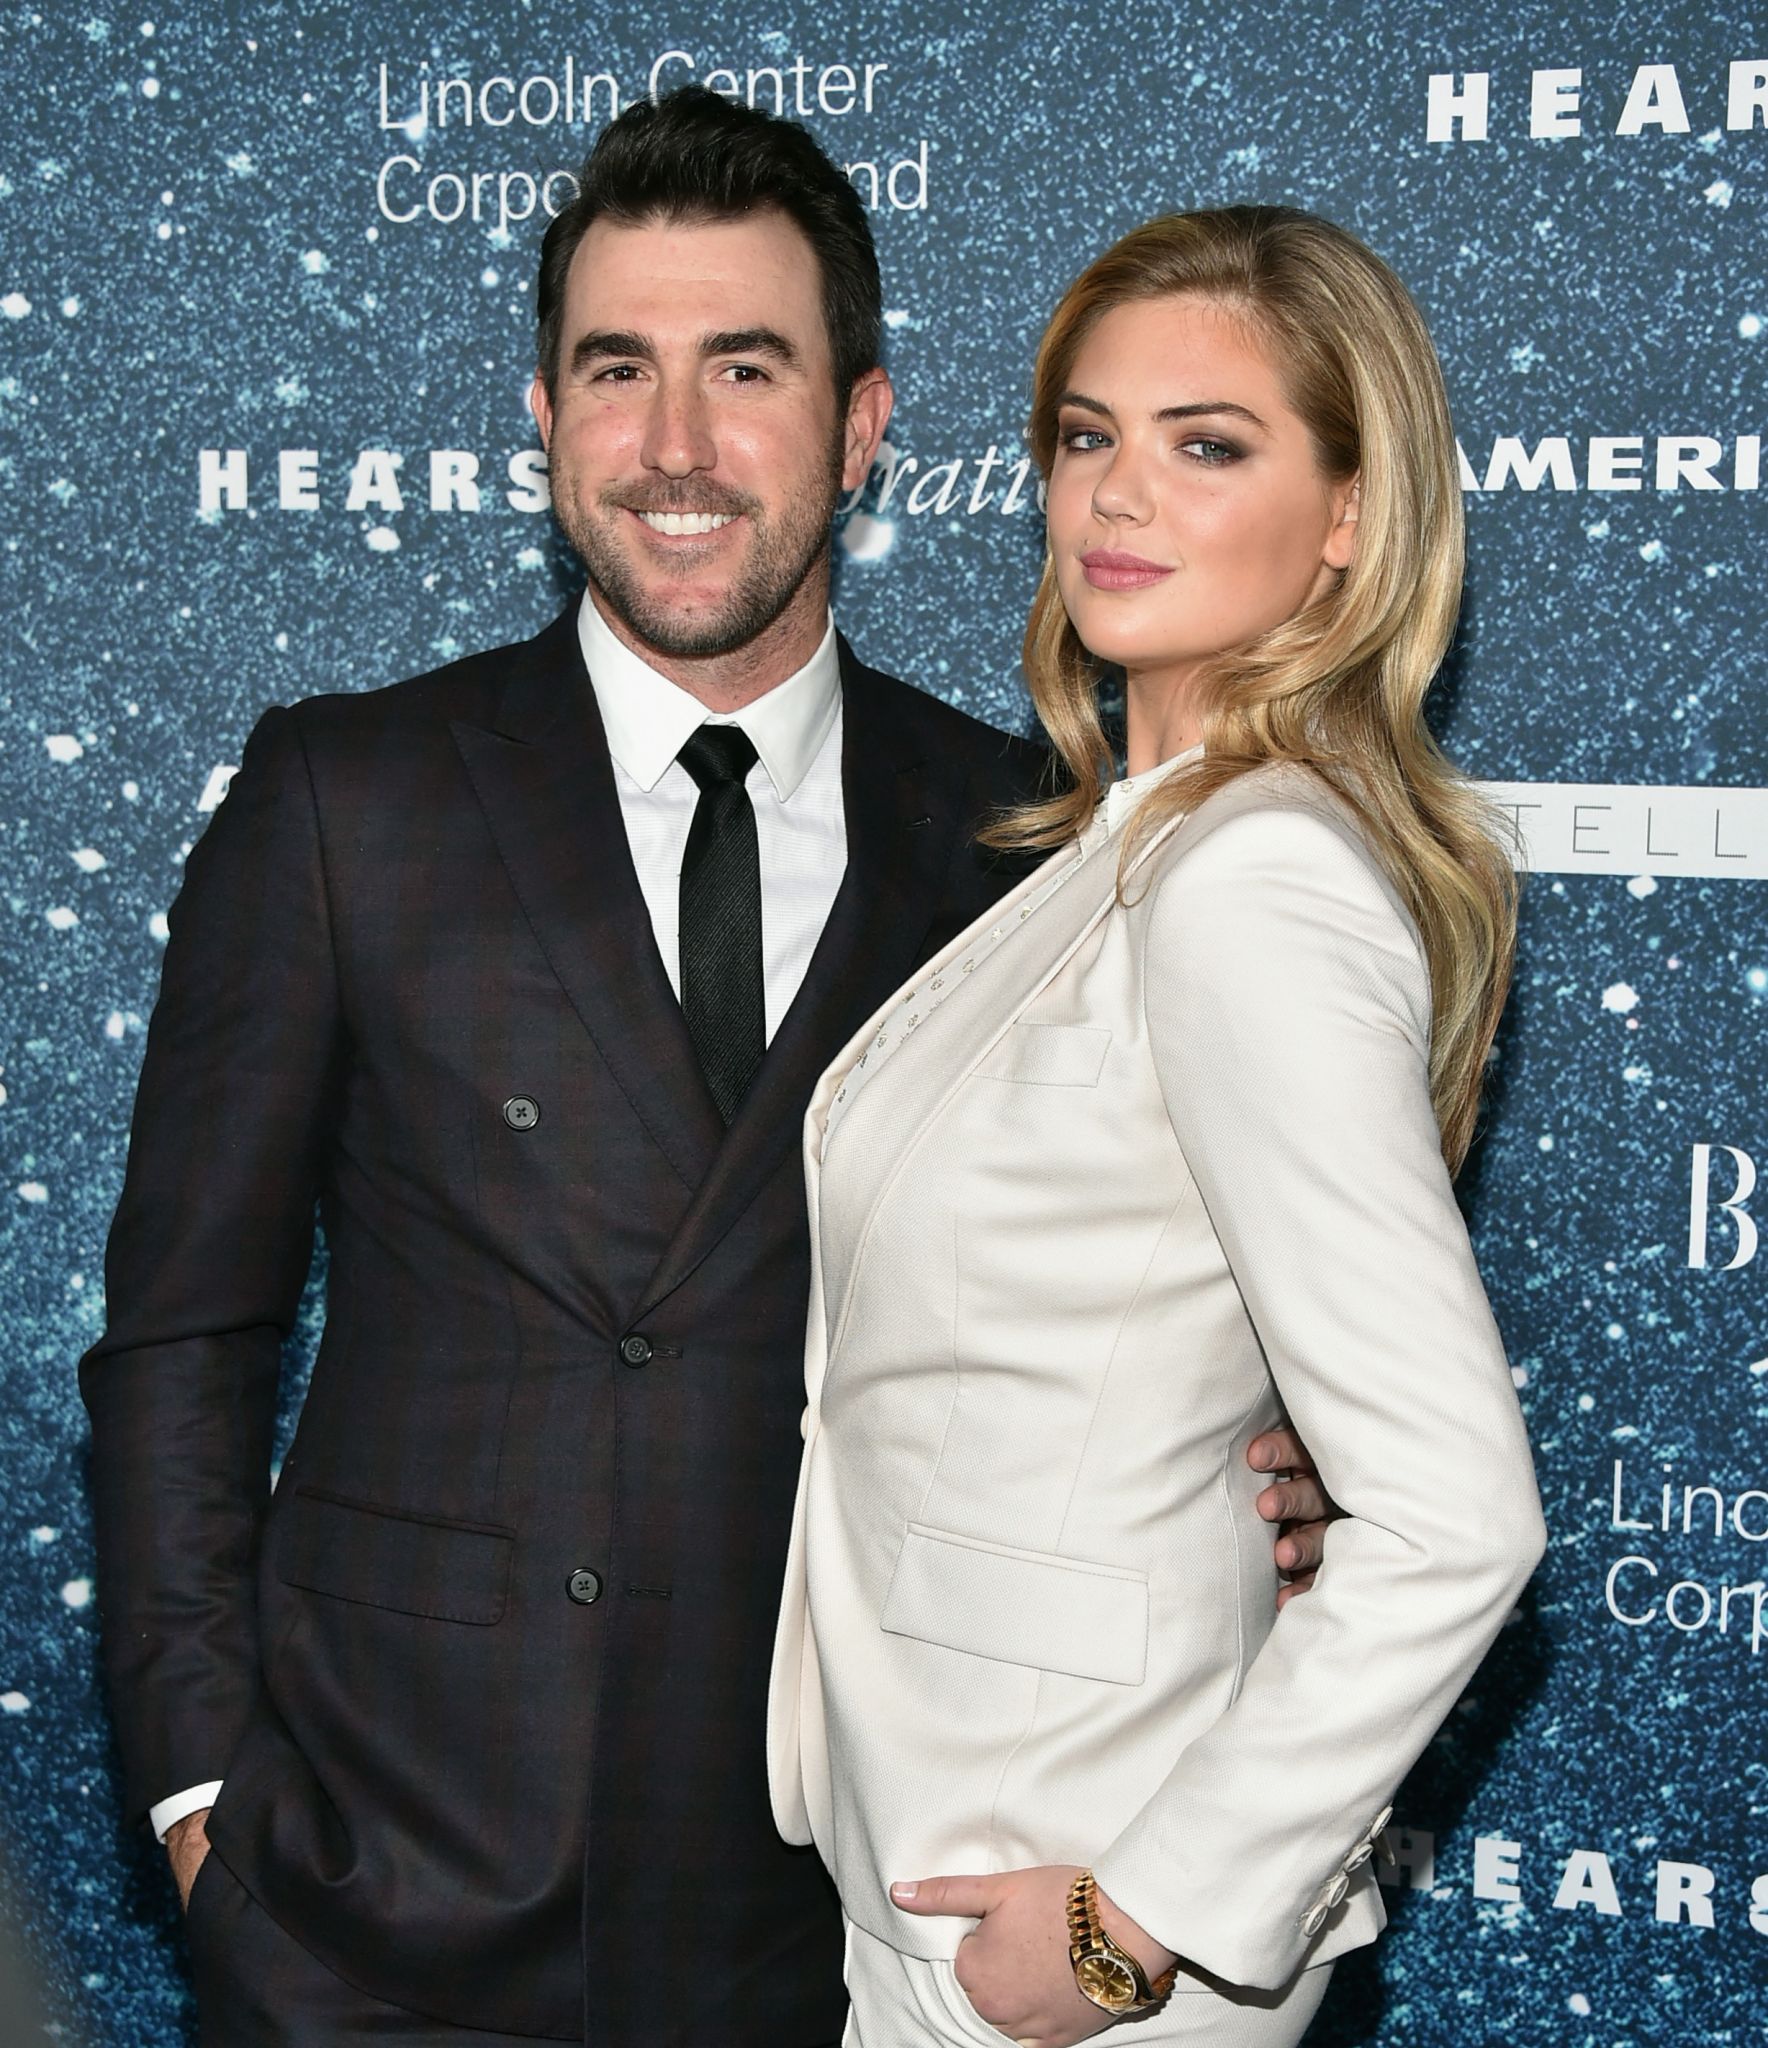 MLB pitcher Justin Verlander is married to one of the top models